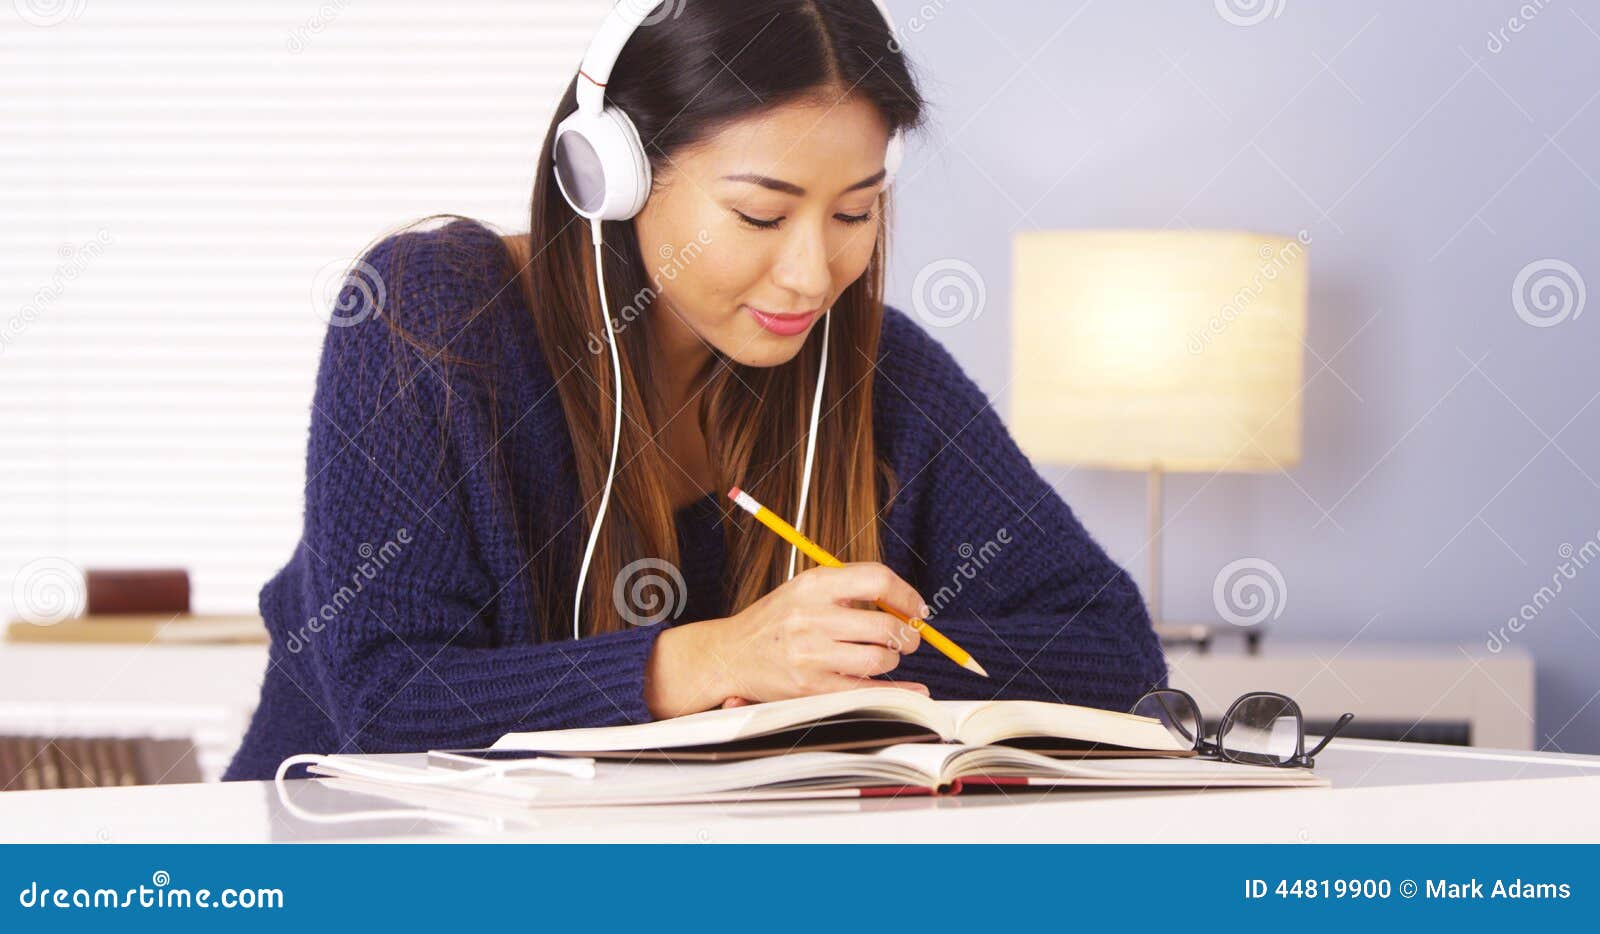 Does music help while doing homework